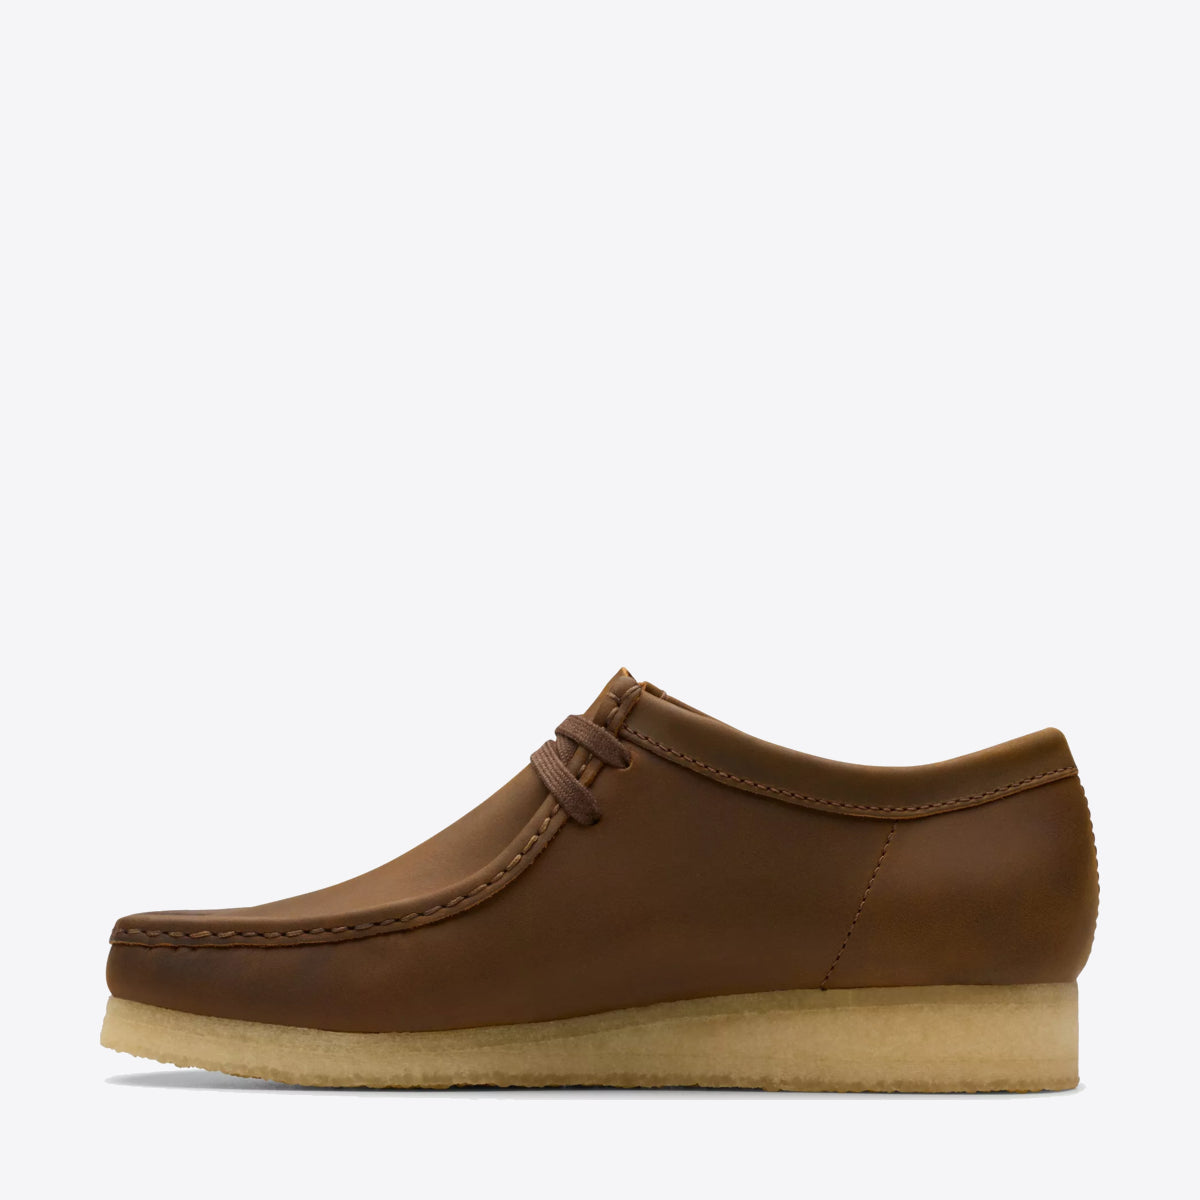 CLARKS Wallabee Shoe Suede Beeswax - Image 2